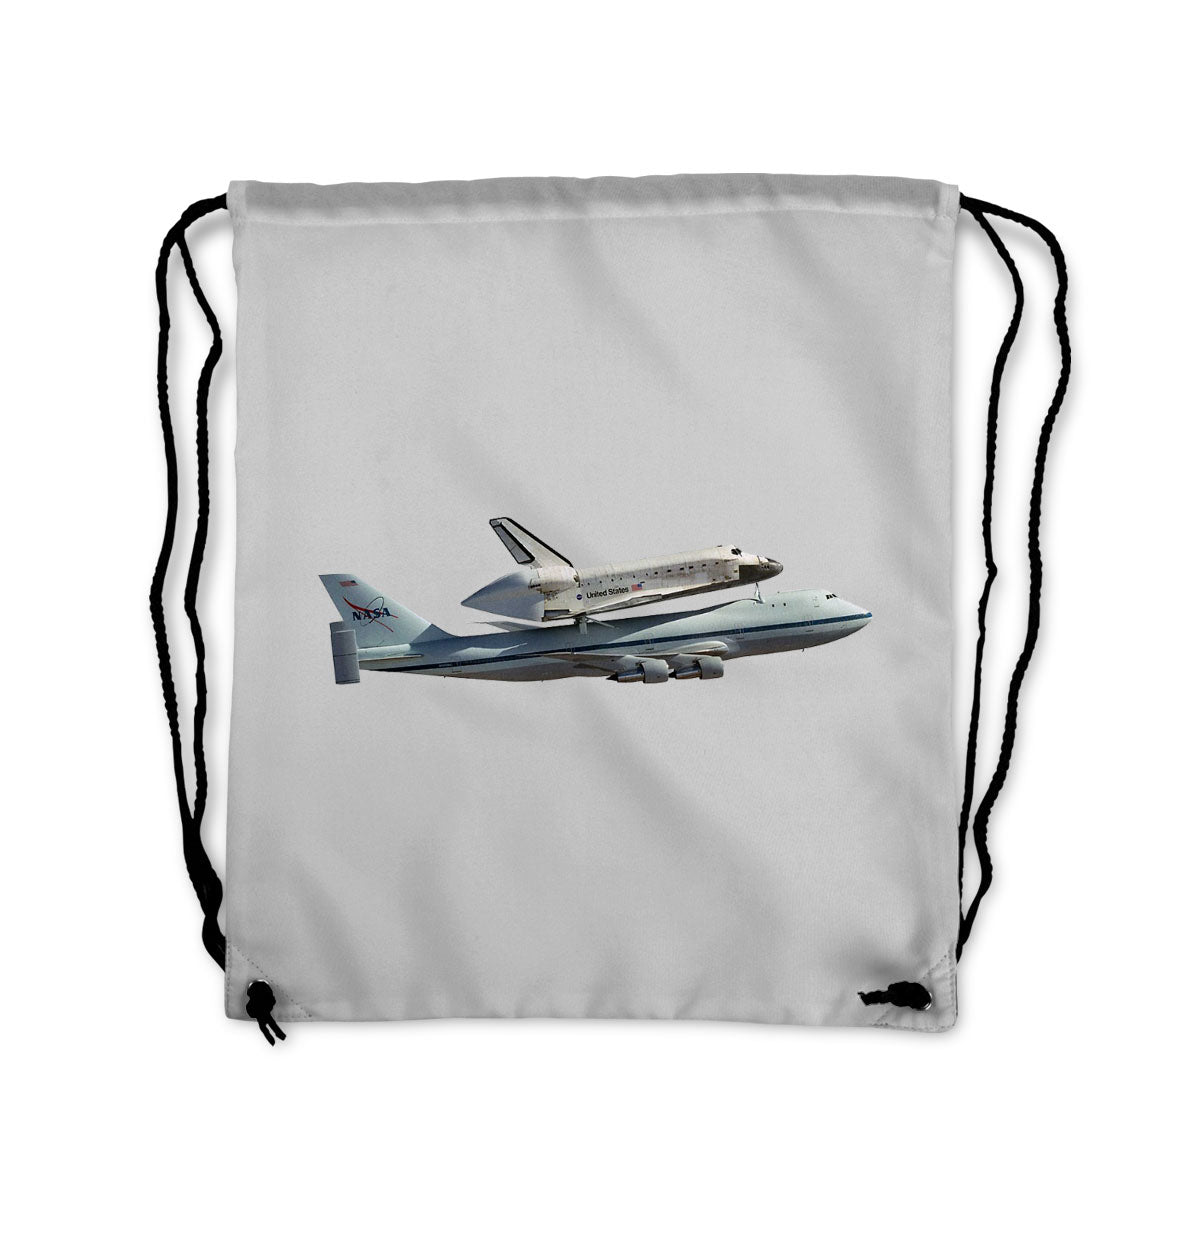 Space shuttle on 747 Designed Drawstring Bags